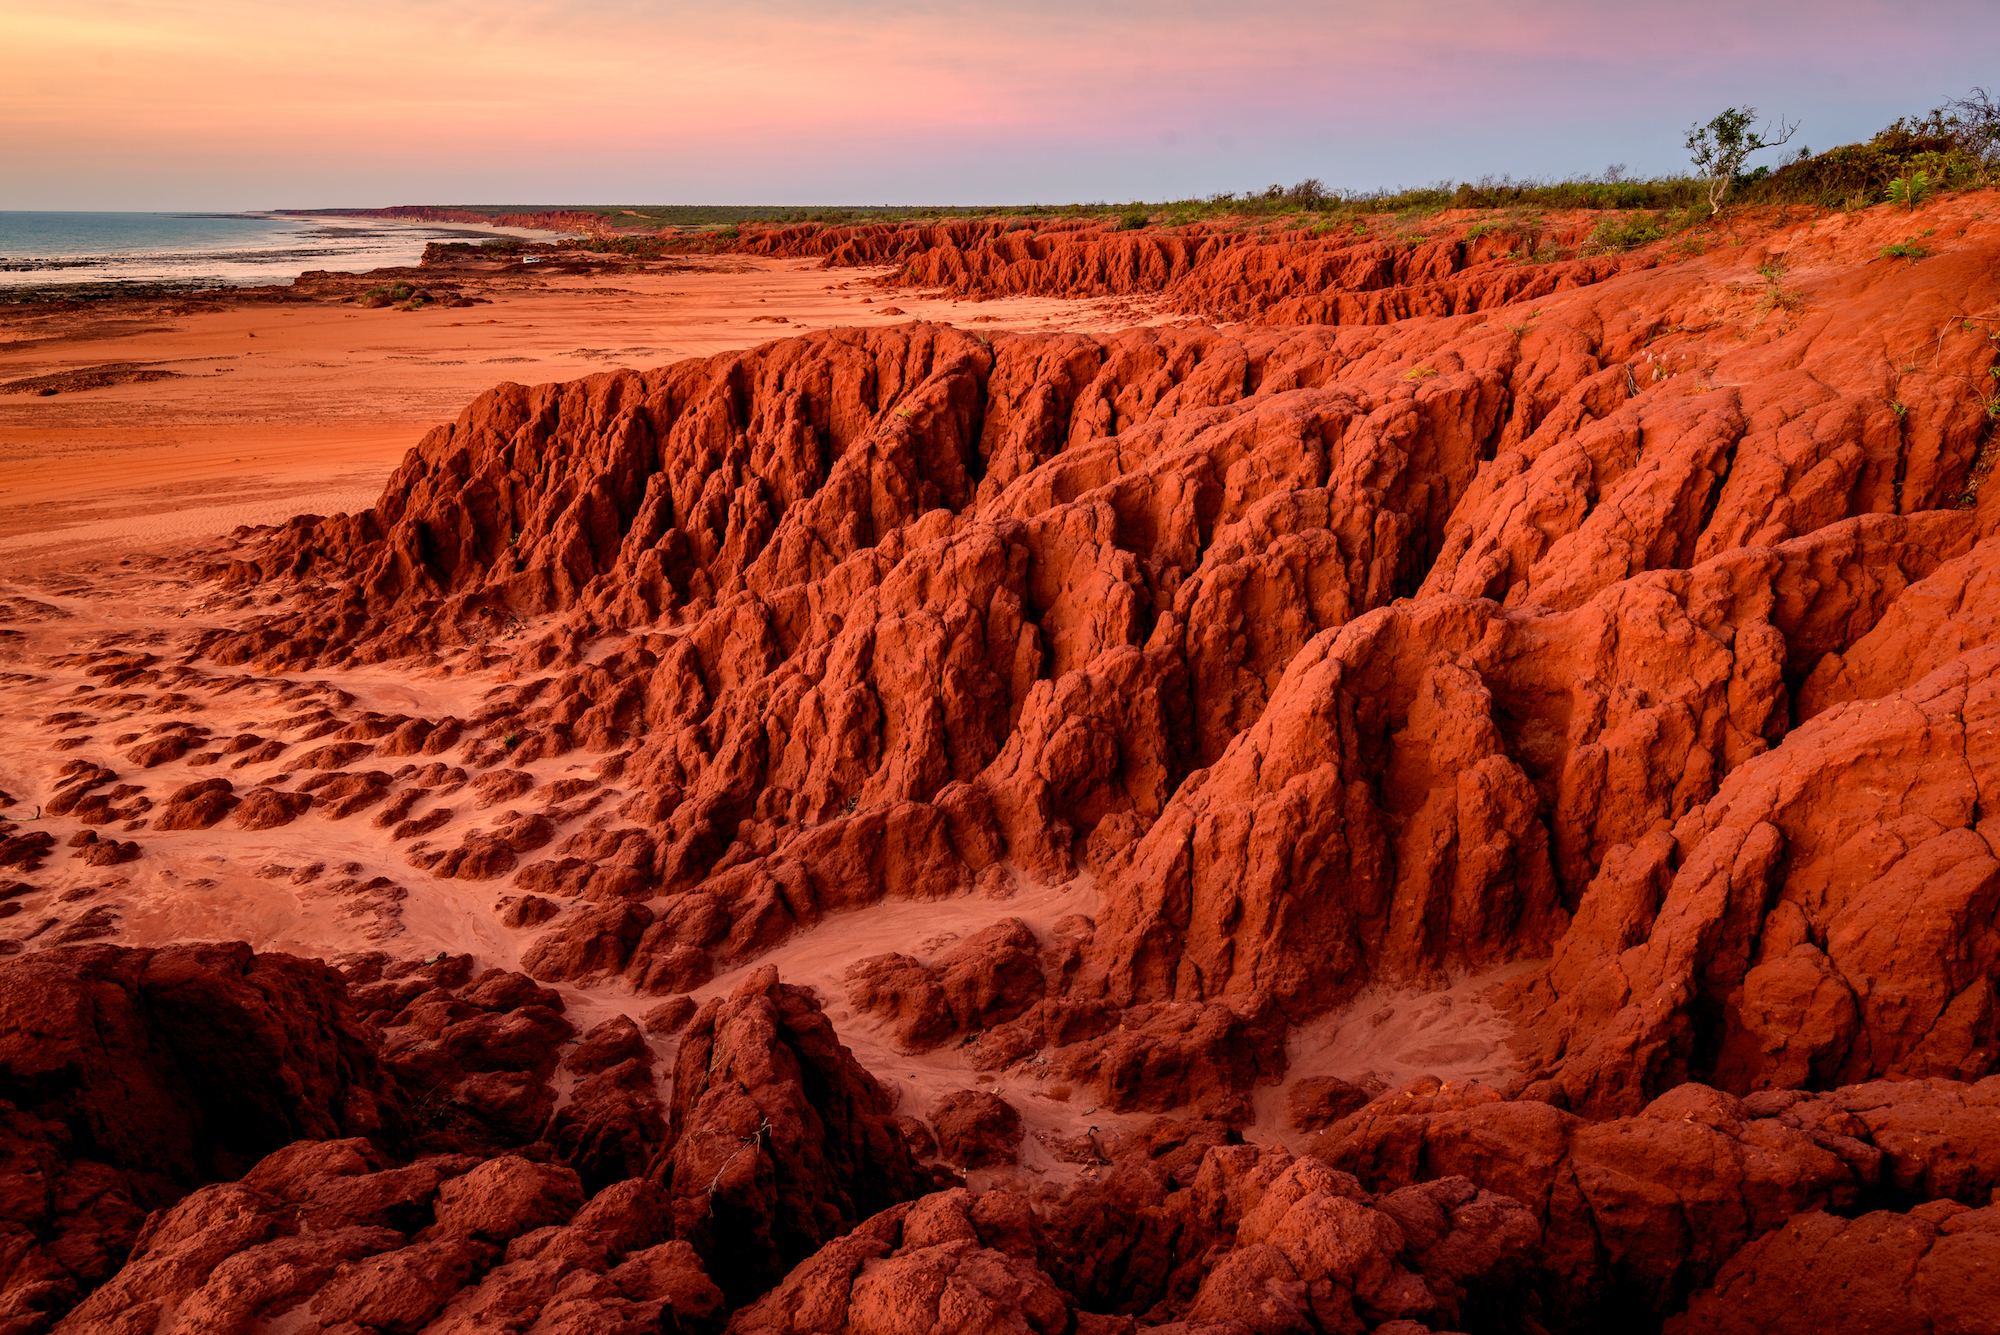 deep red, rocky cliffs stretch from the right side of the screen, melting into sandy beach and blue water